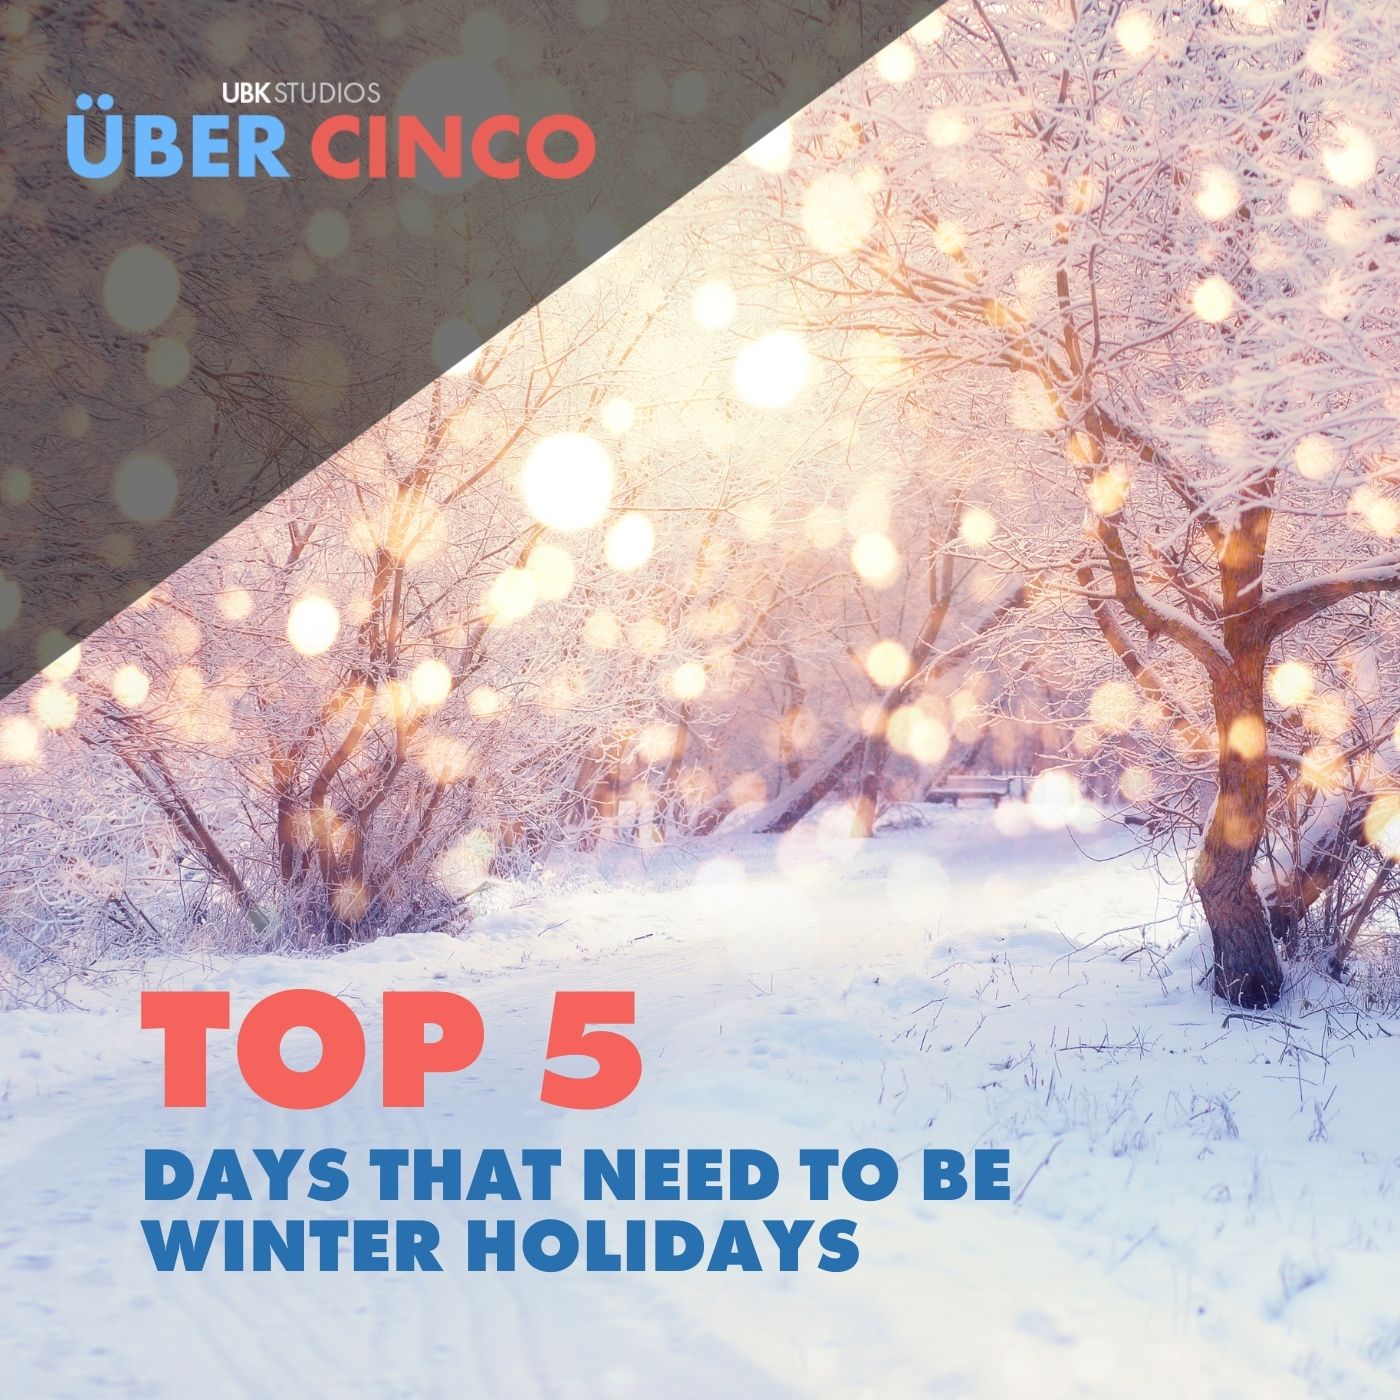 Top 5 Days That Need to Be Winter Holidays Image